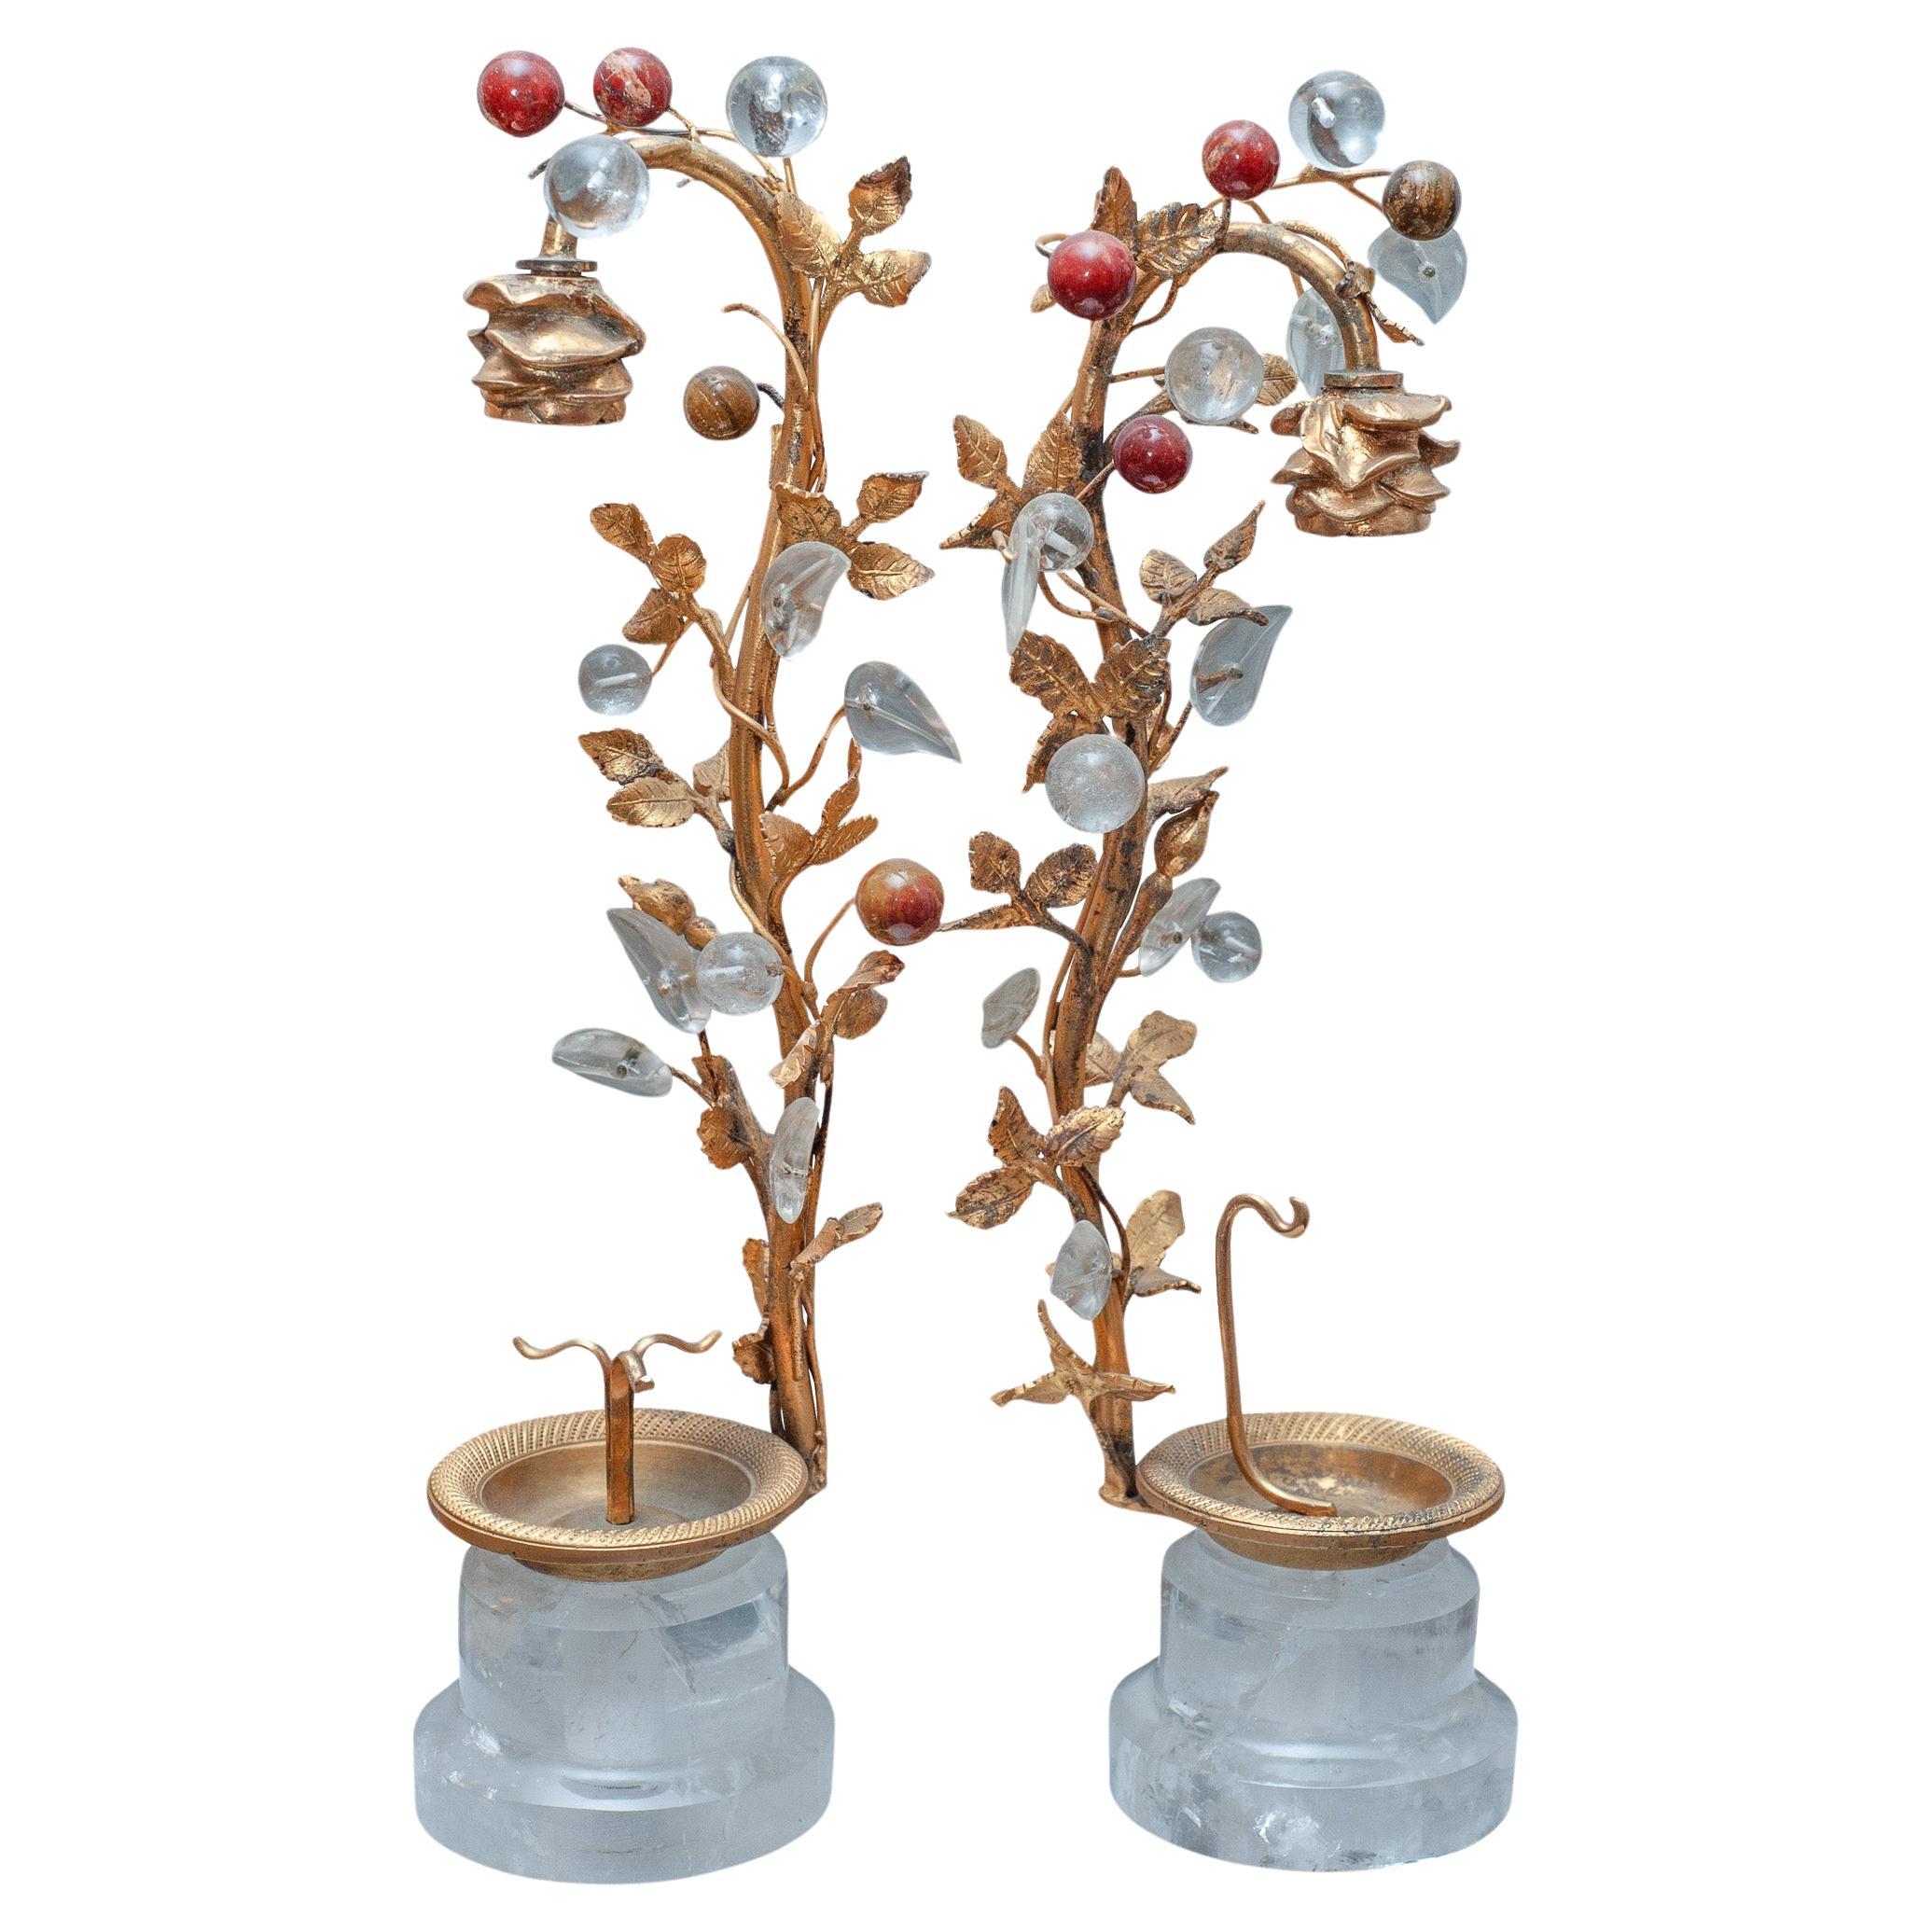 Antique French Pair of Rock Crystal Tree Objets with Semi-Precious Fruit 